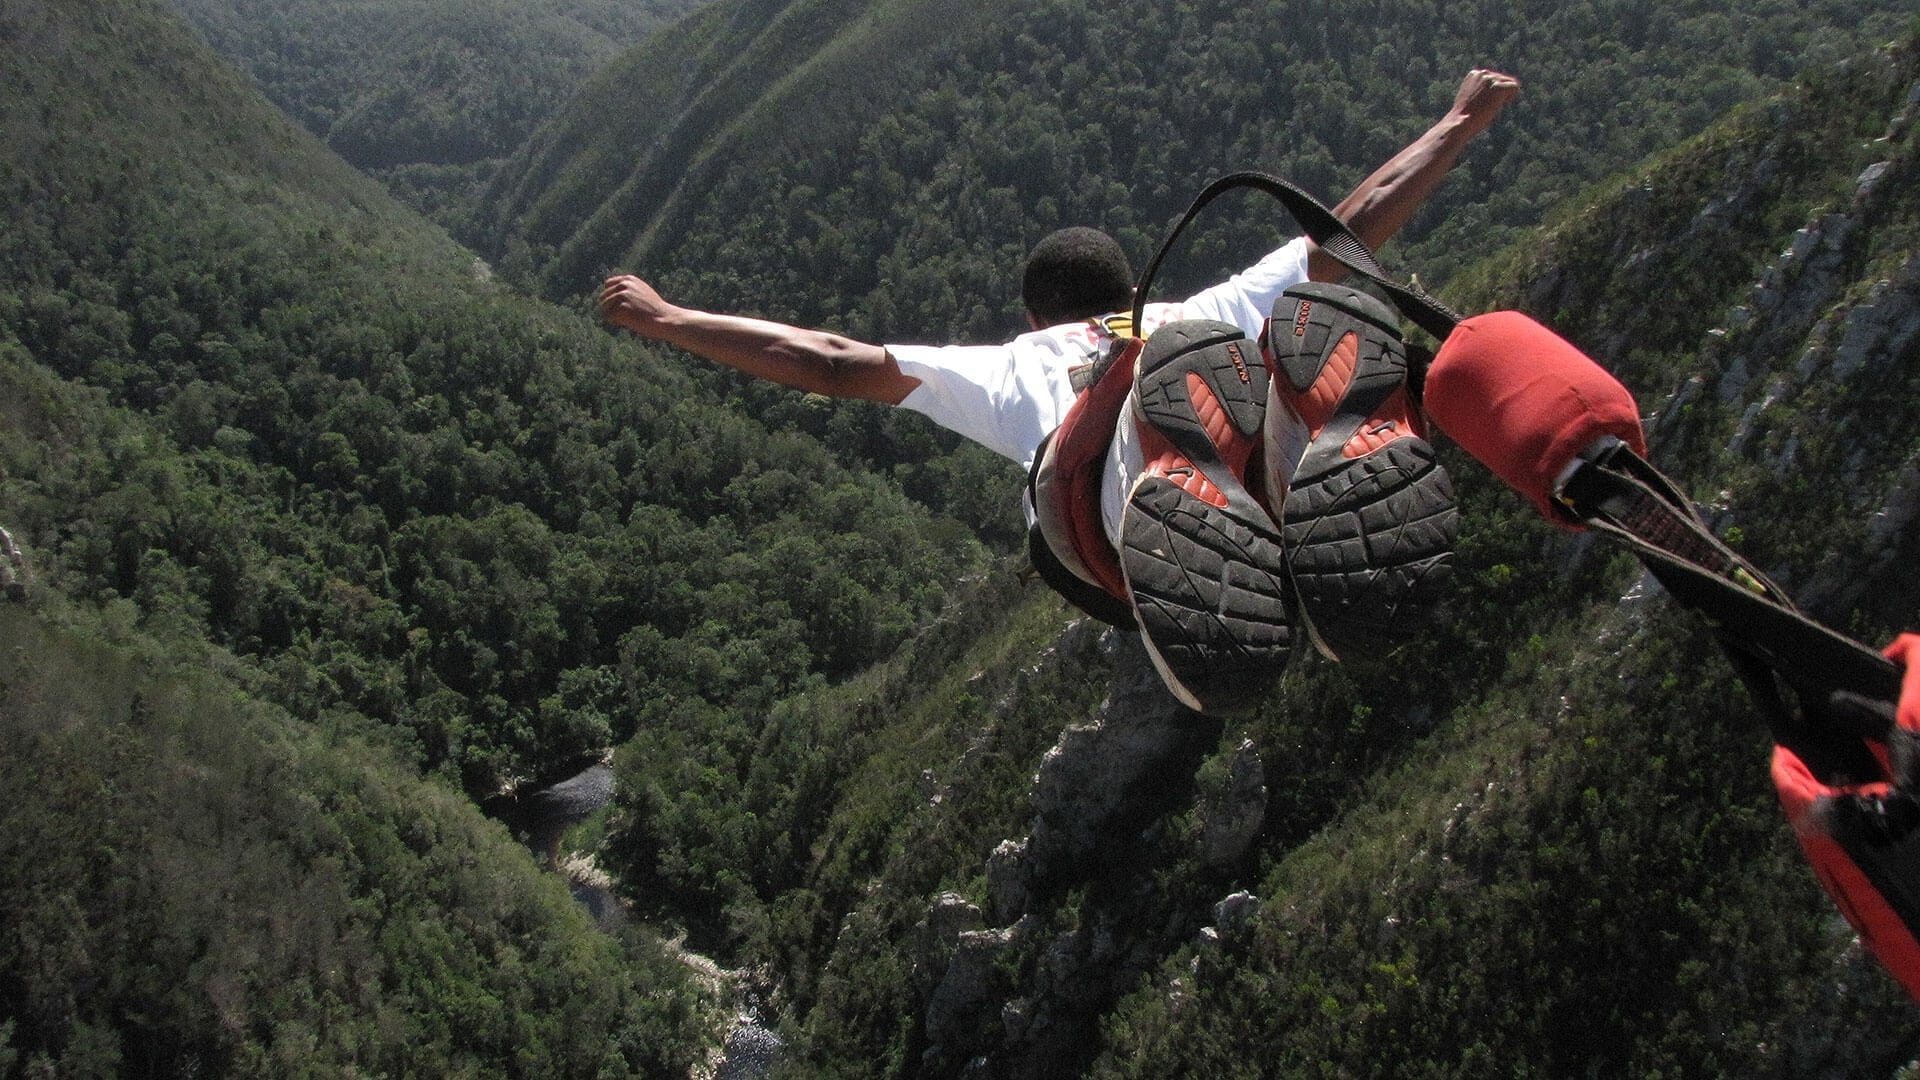 Bungee Jumping: Extreme leisure at The Tsitsikamma National Park, South Africa. 1920x1080 Full HD Wallpaper.